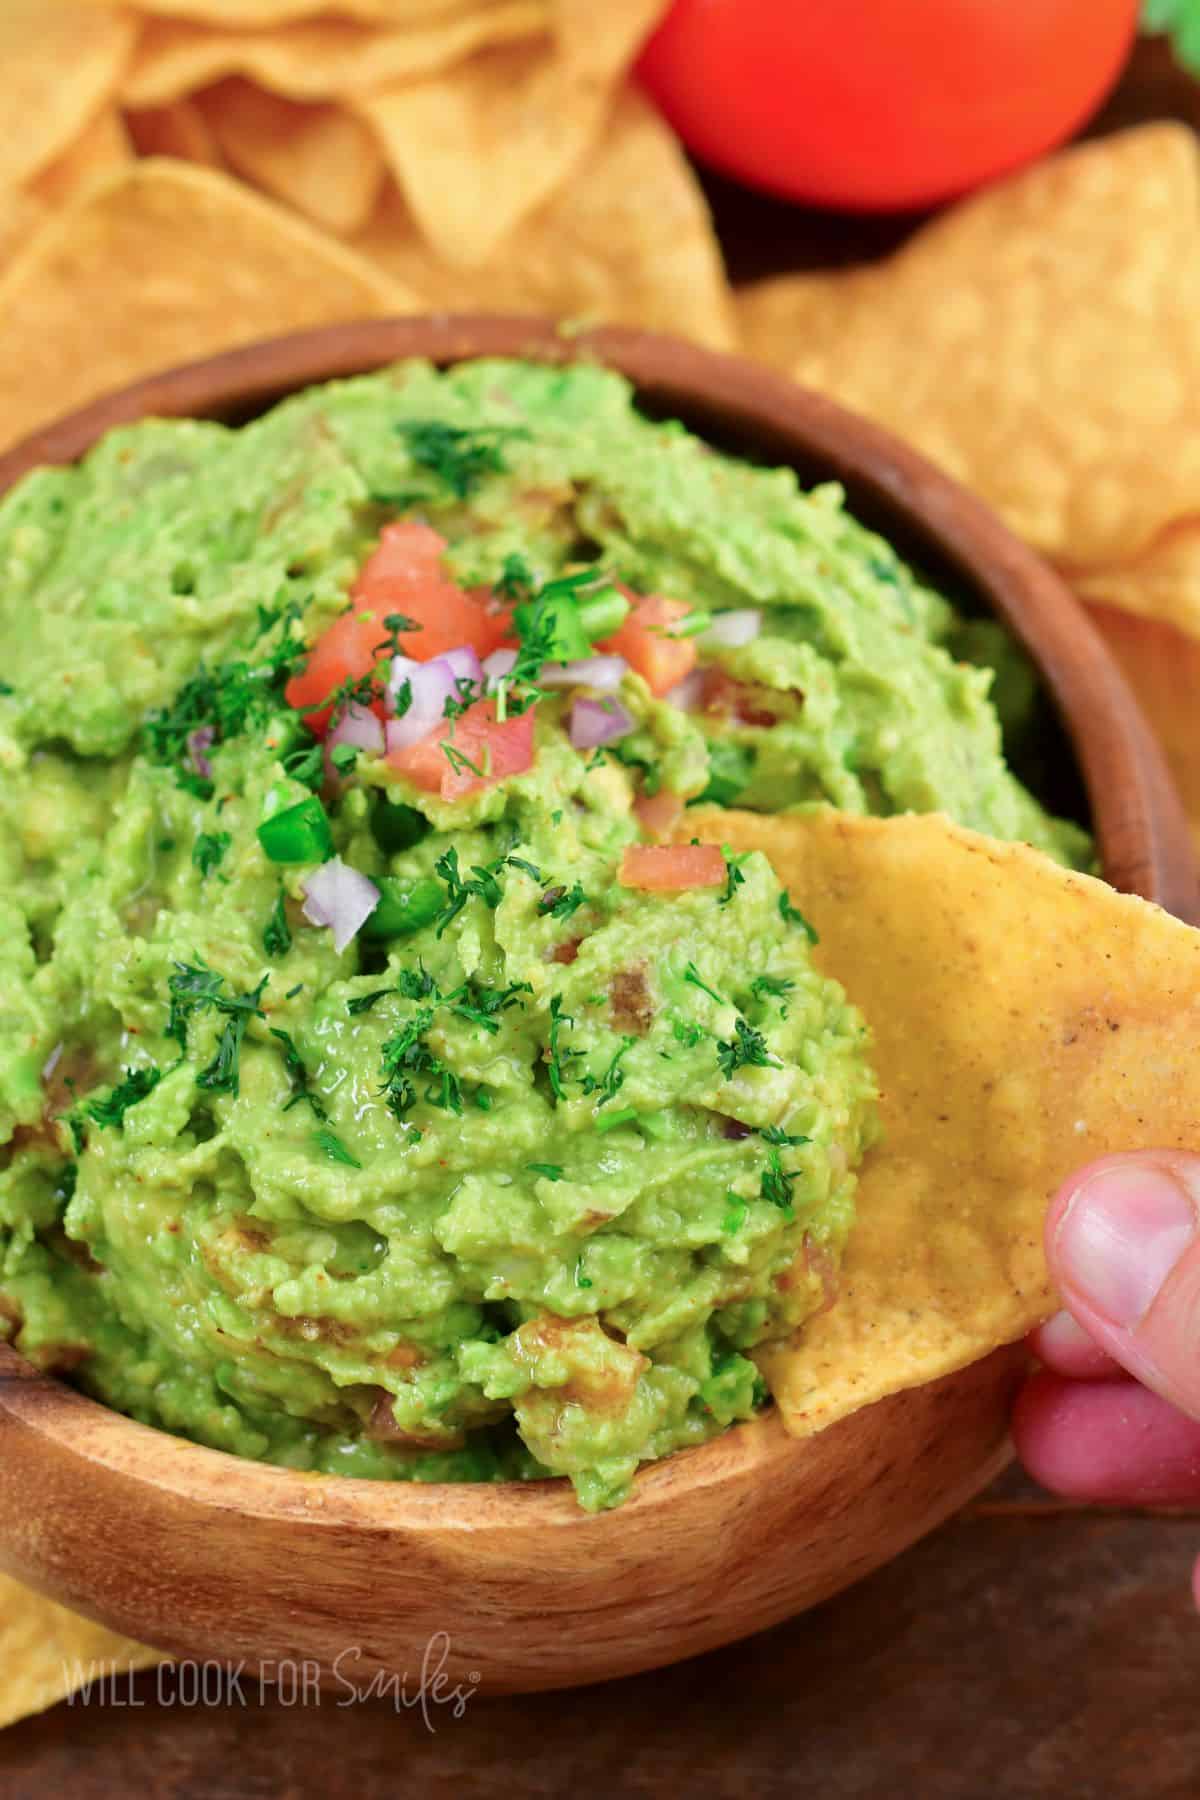 scooping out some guacamole with a chip.